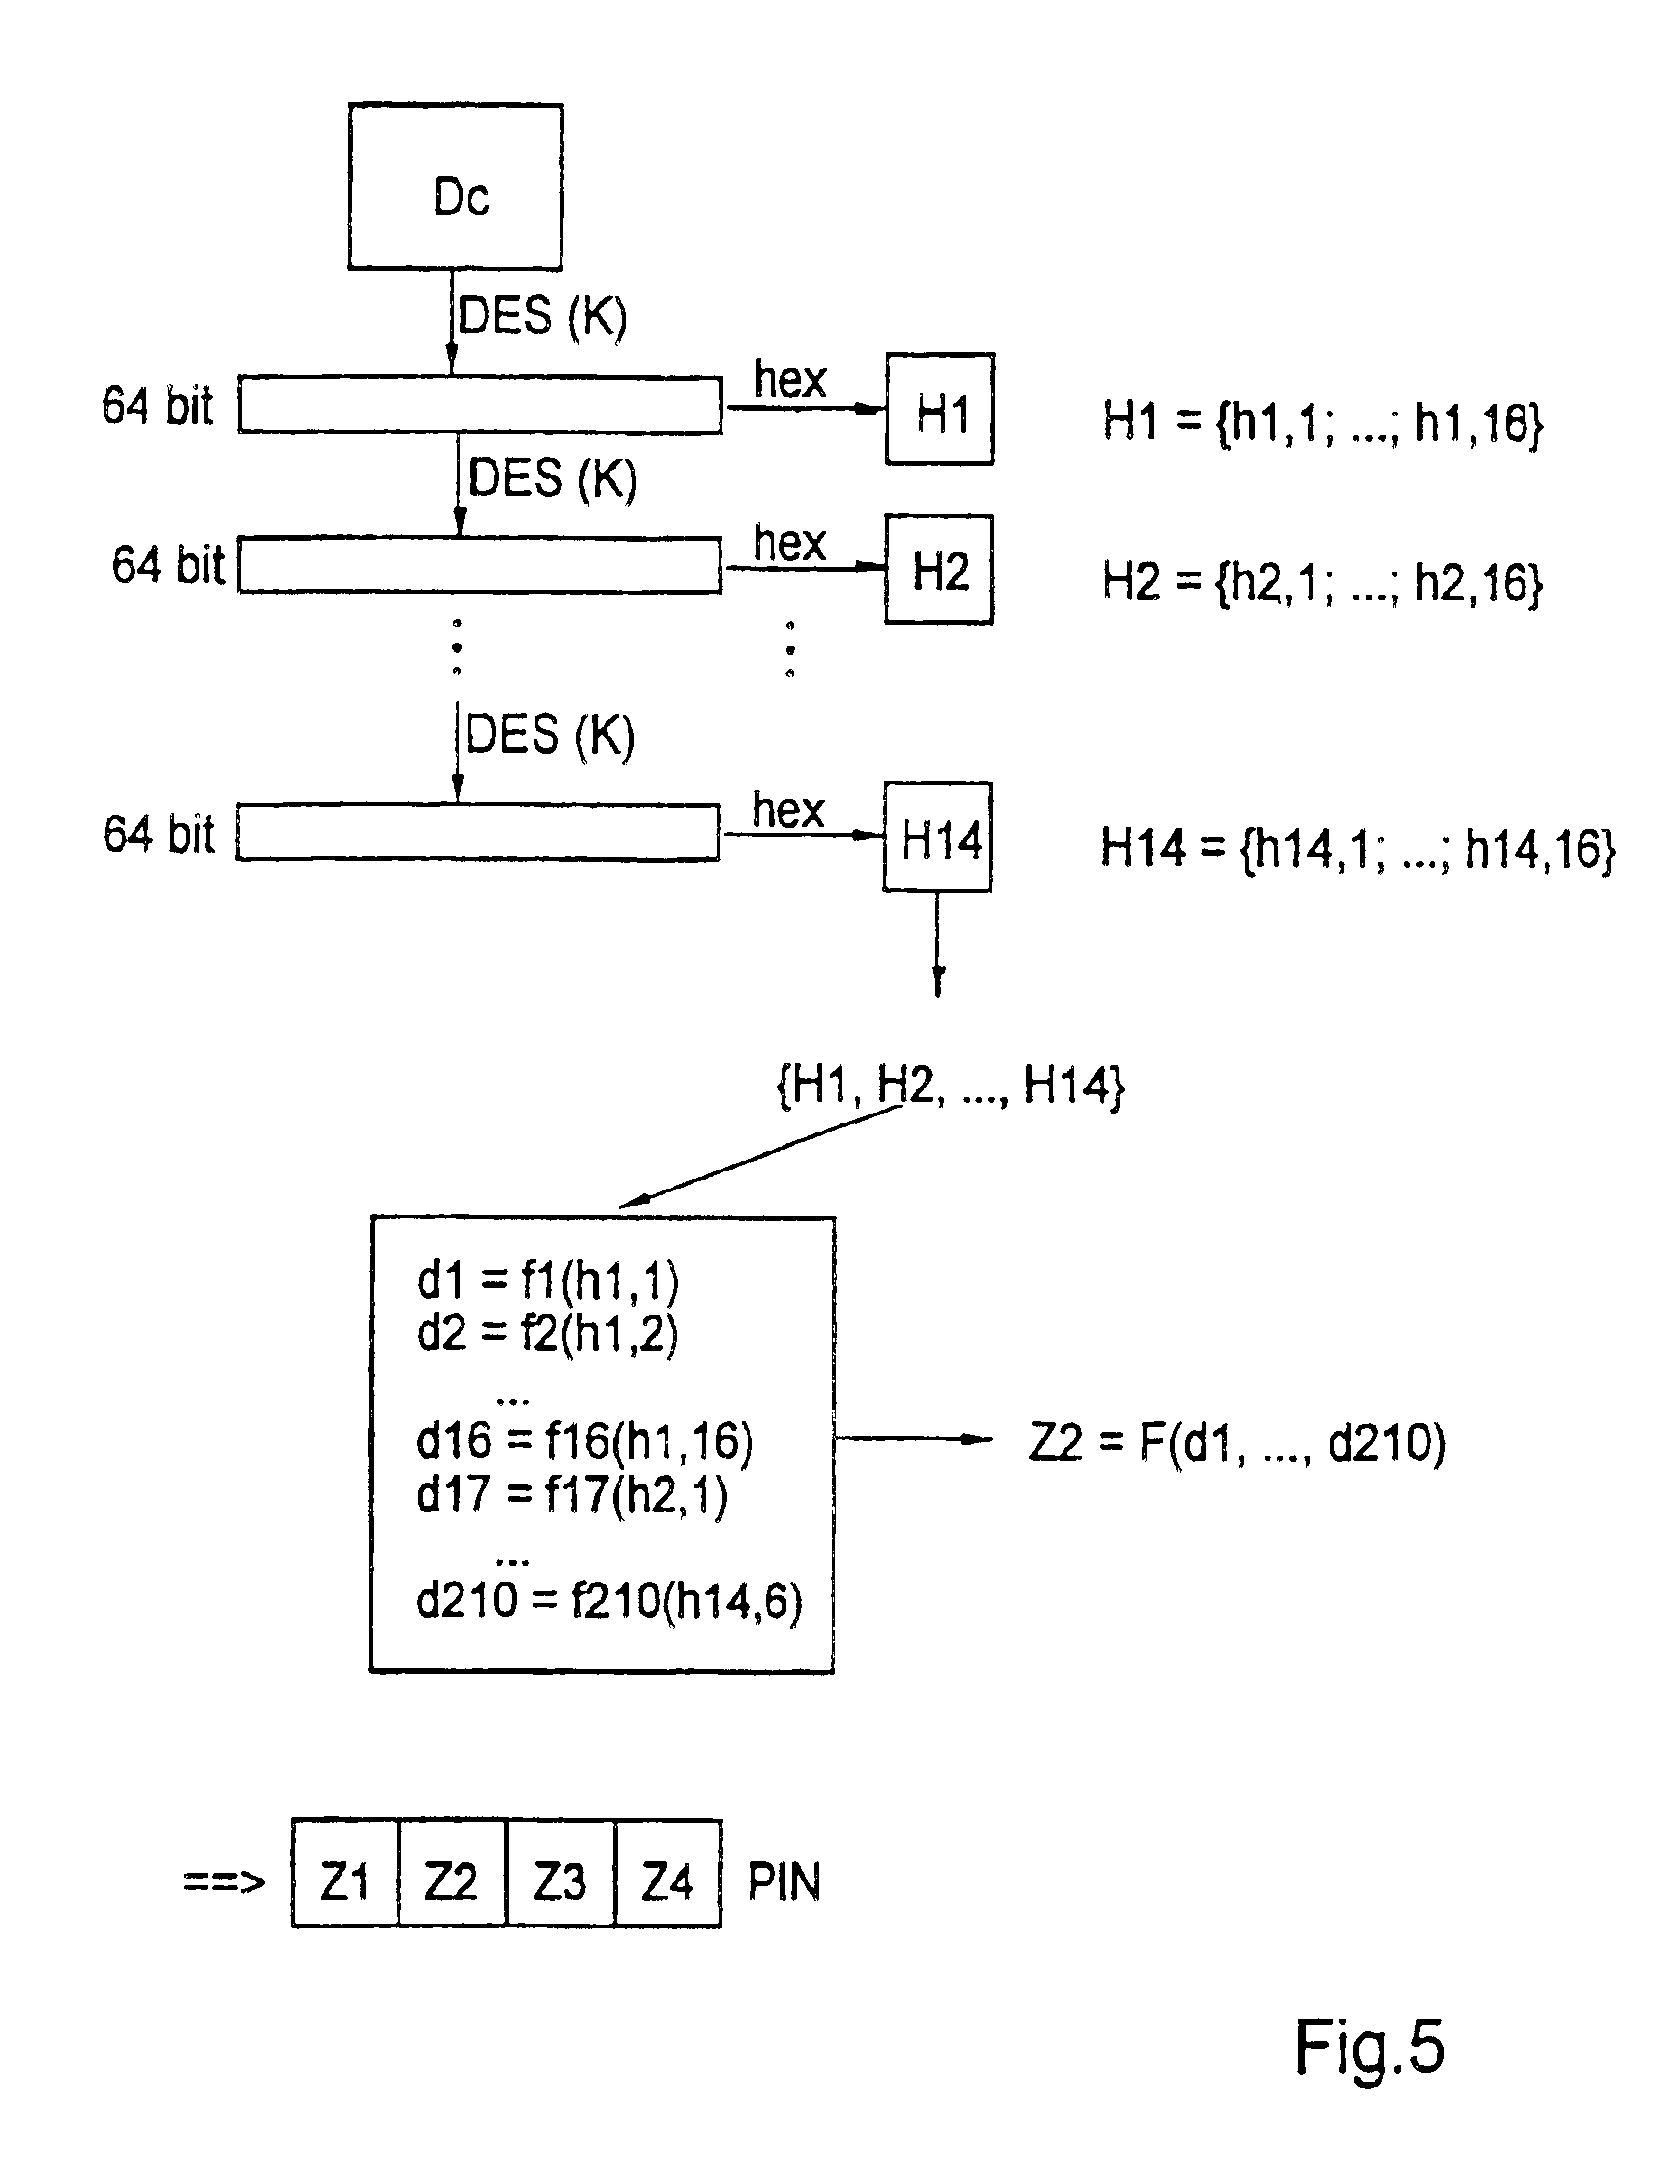 Method for generating identification numbers